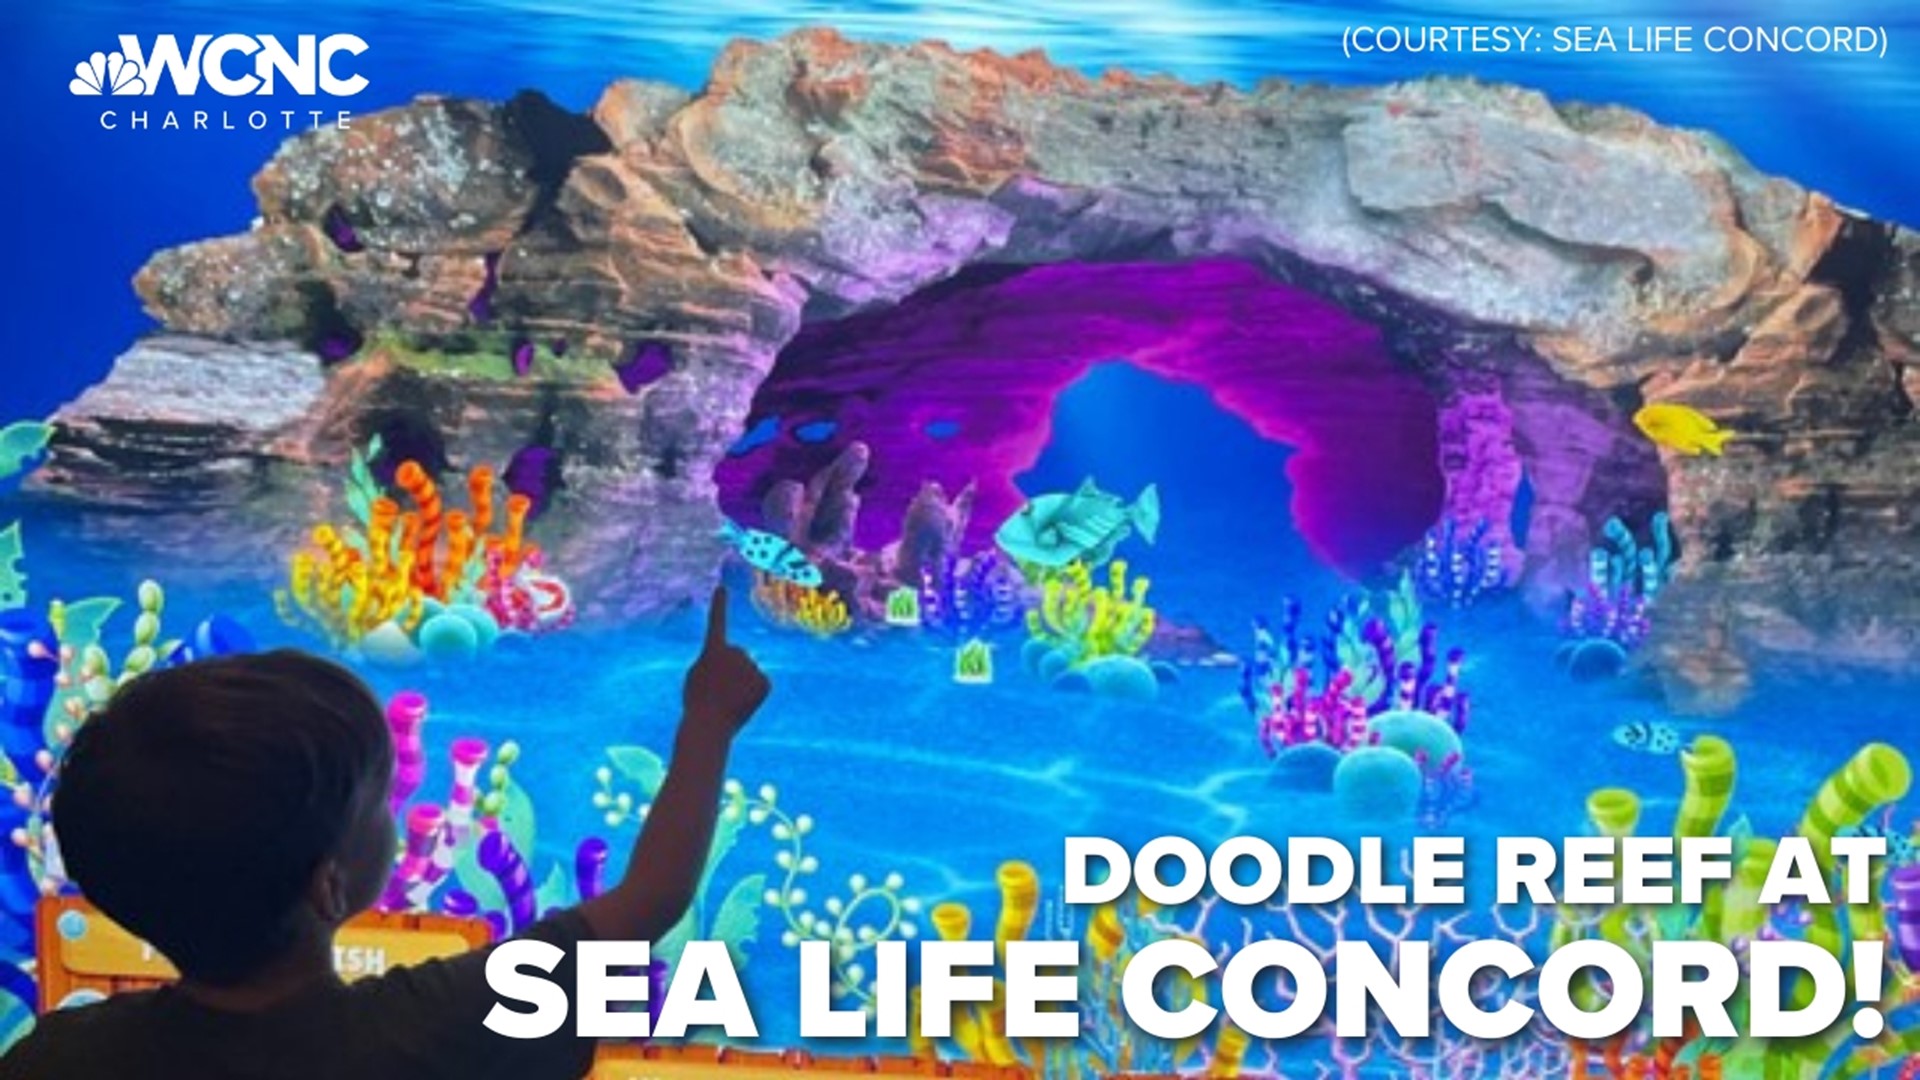 The display, which is included in regular admission, will be at SEA LIFE Charlotte-Concord in Concord Mills throughout the year.